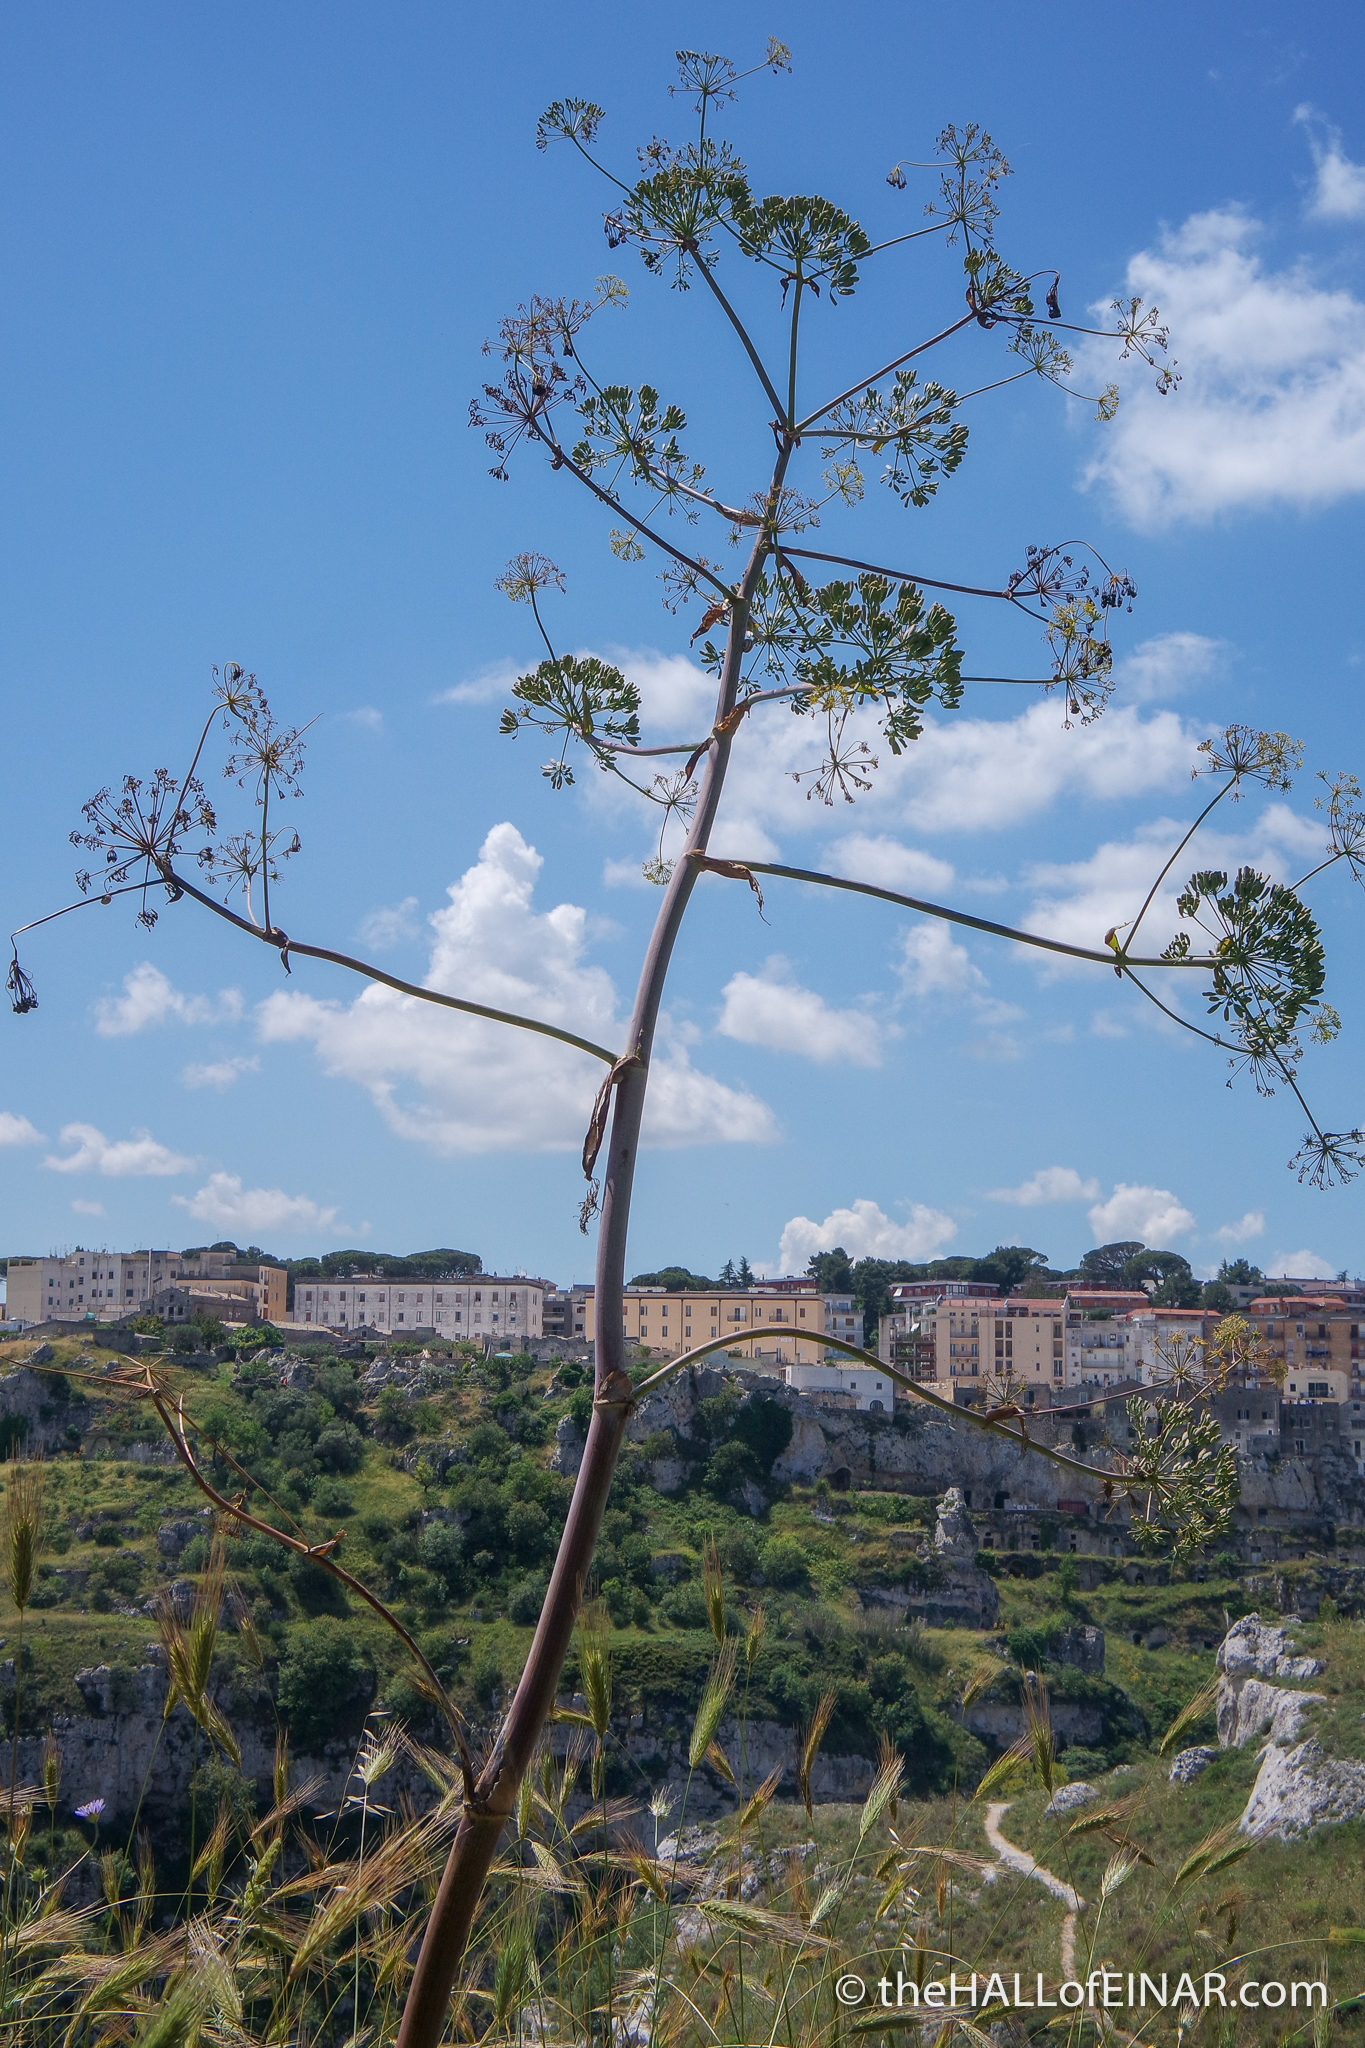 Giant Fennel - Matera - The Hall of Einar - photograph (c) David Bailey (not the)